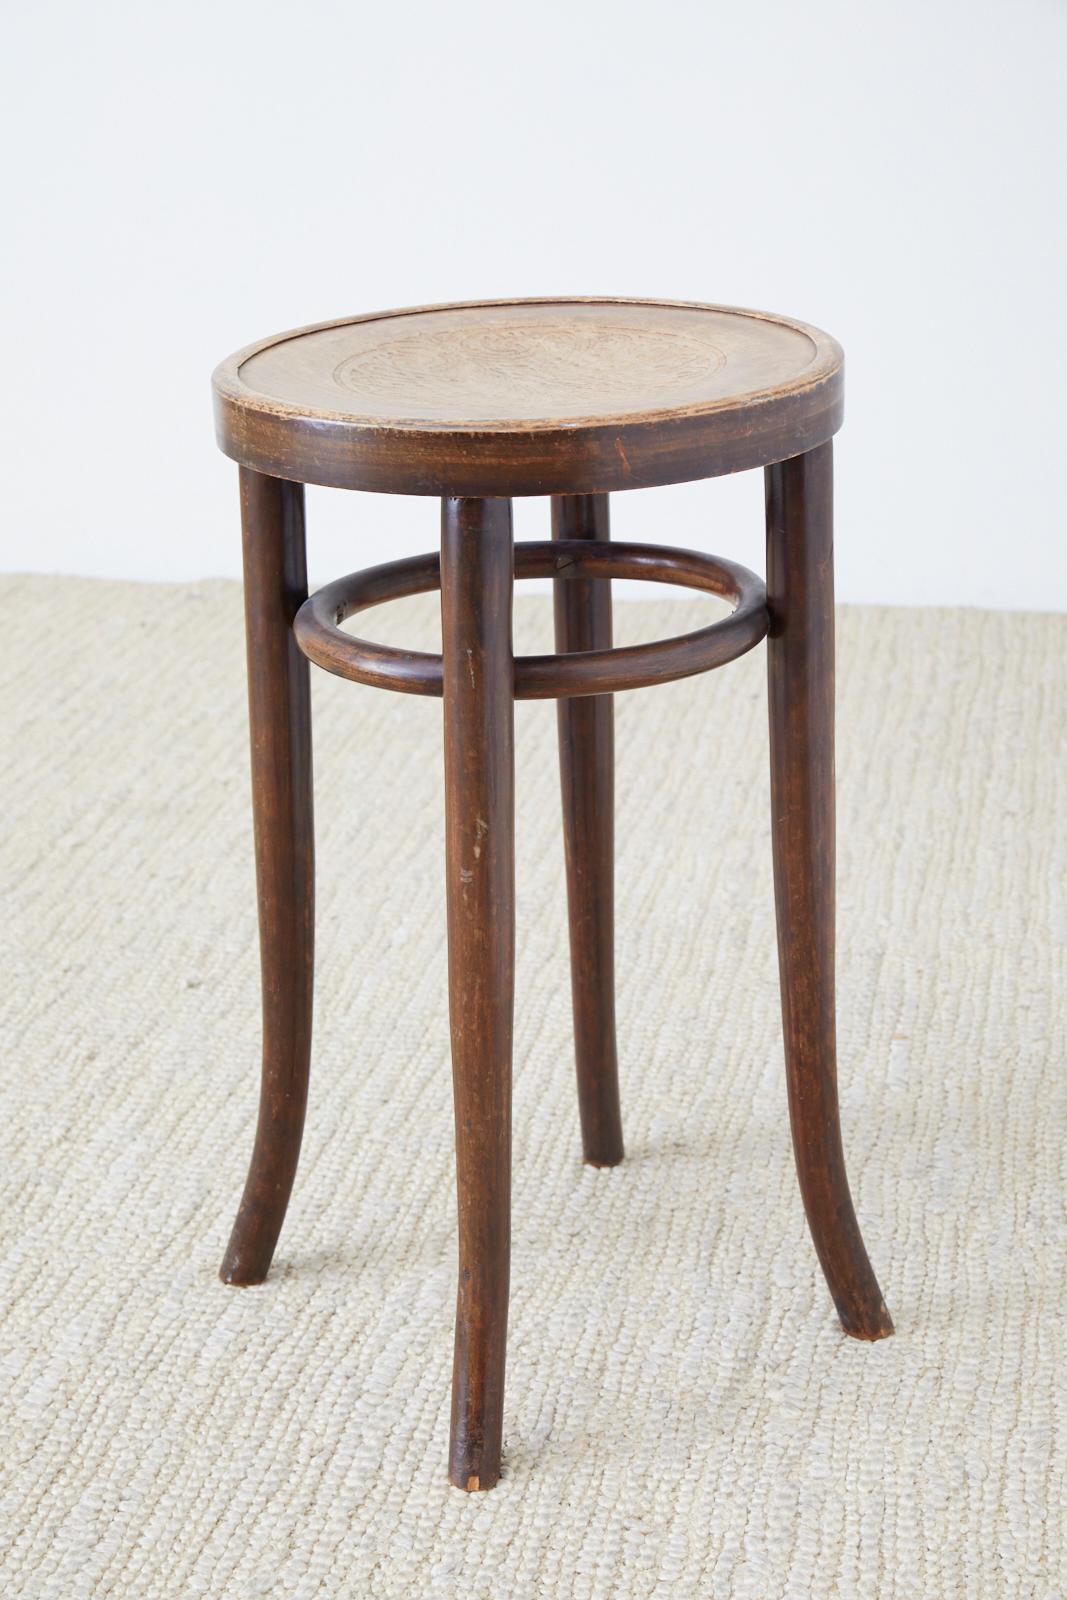 Vienna Secession Early 20th Century Bentwood Stool Attributed to Thonet